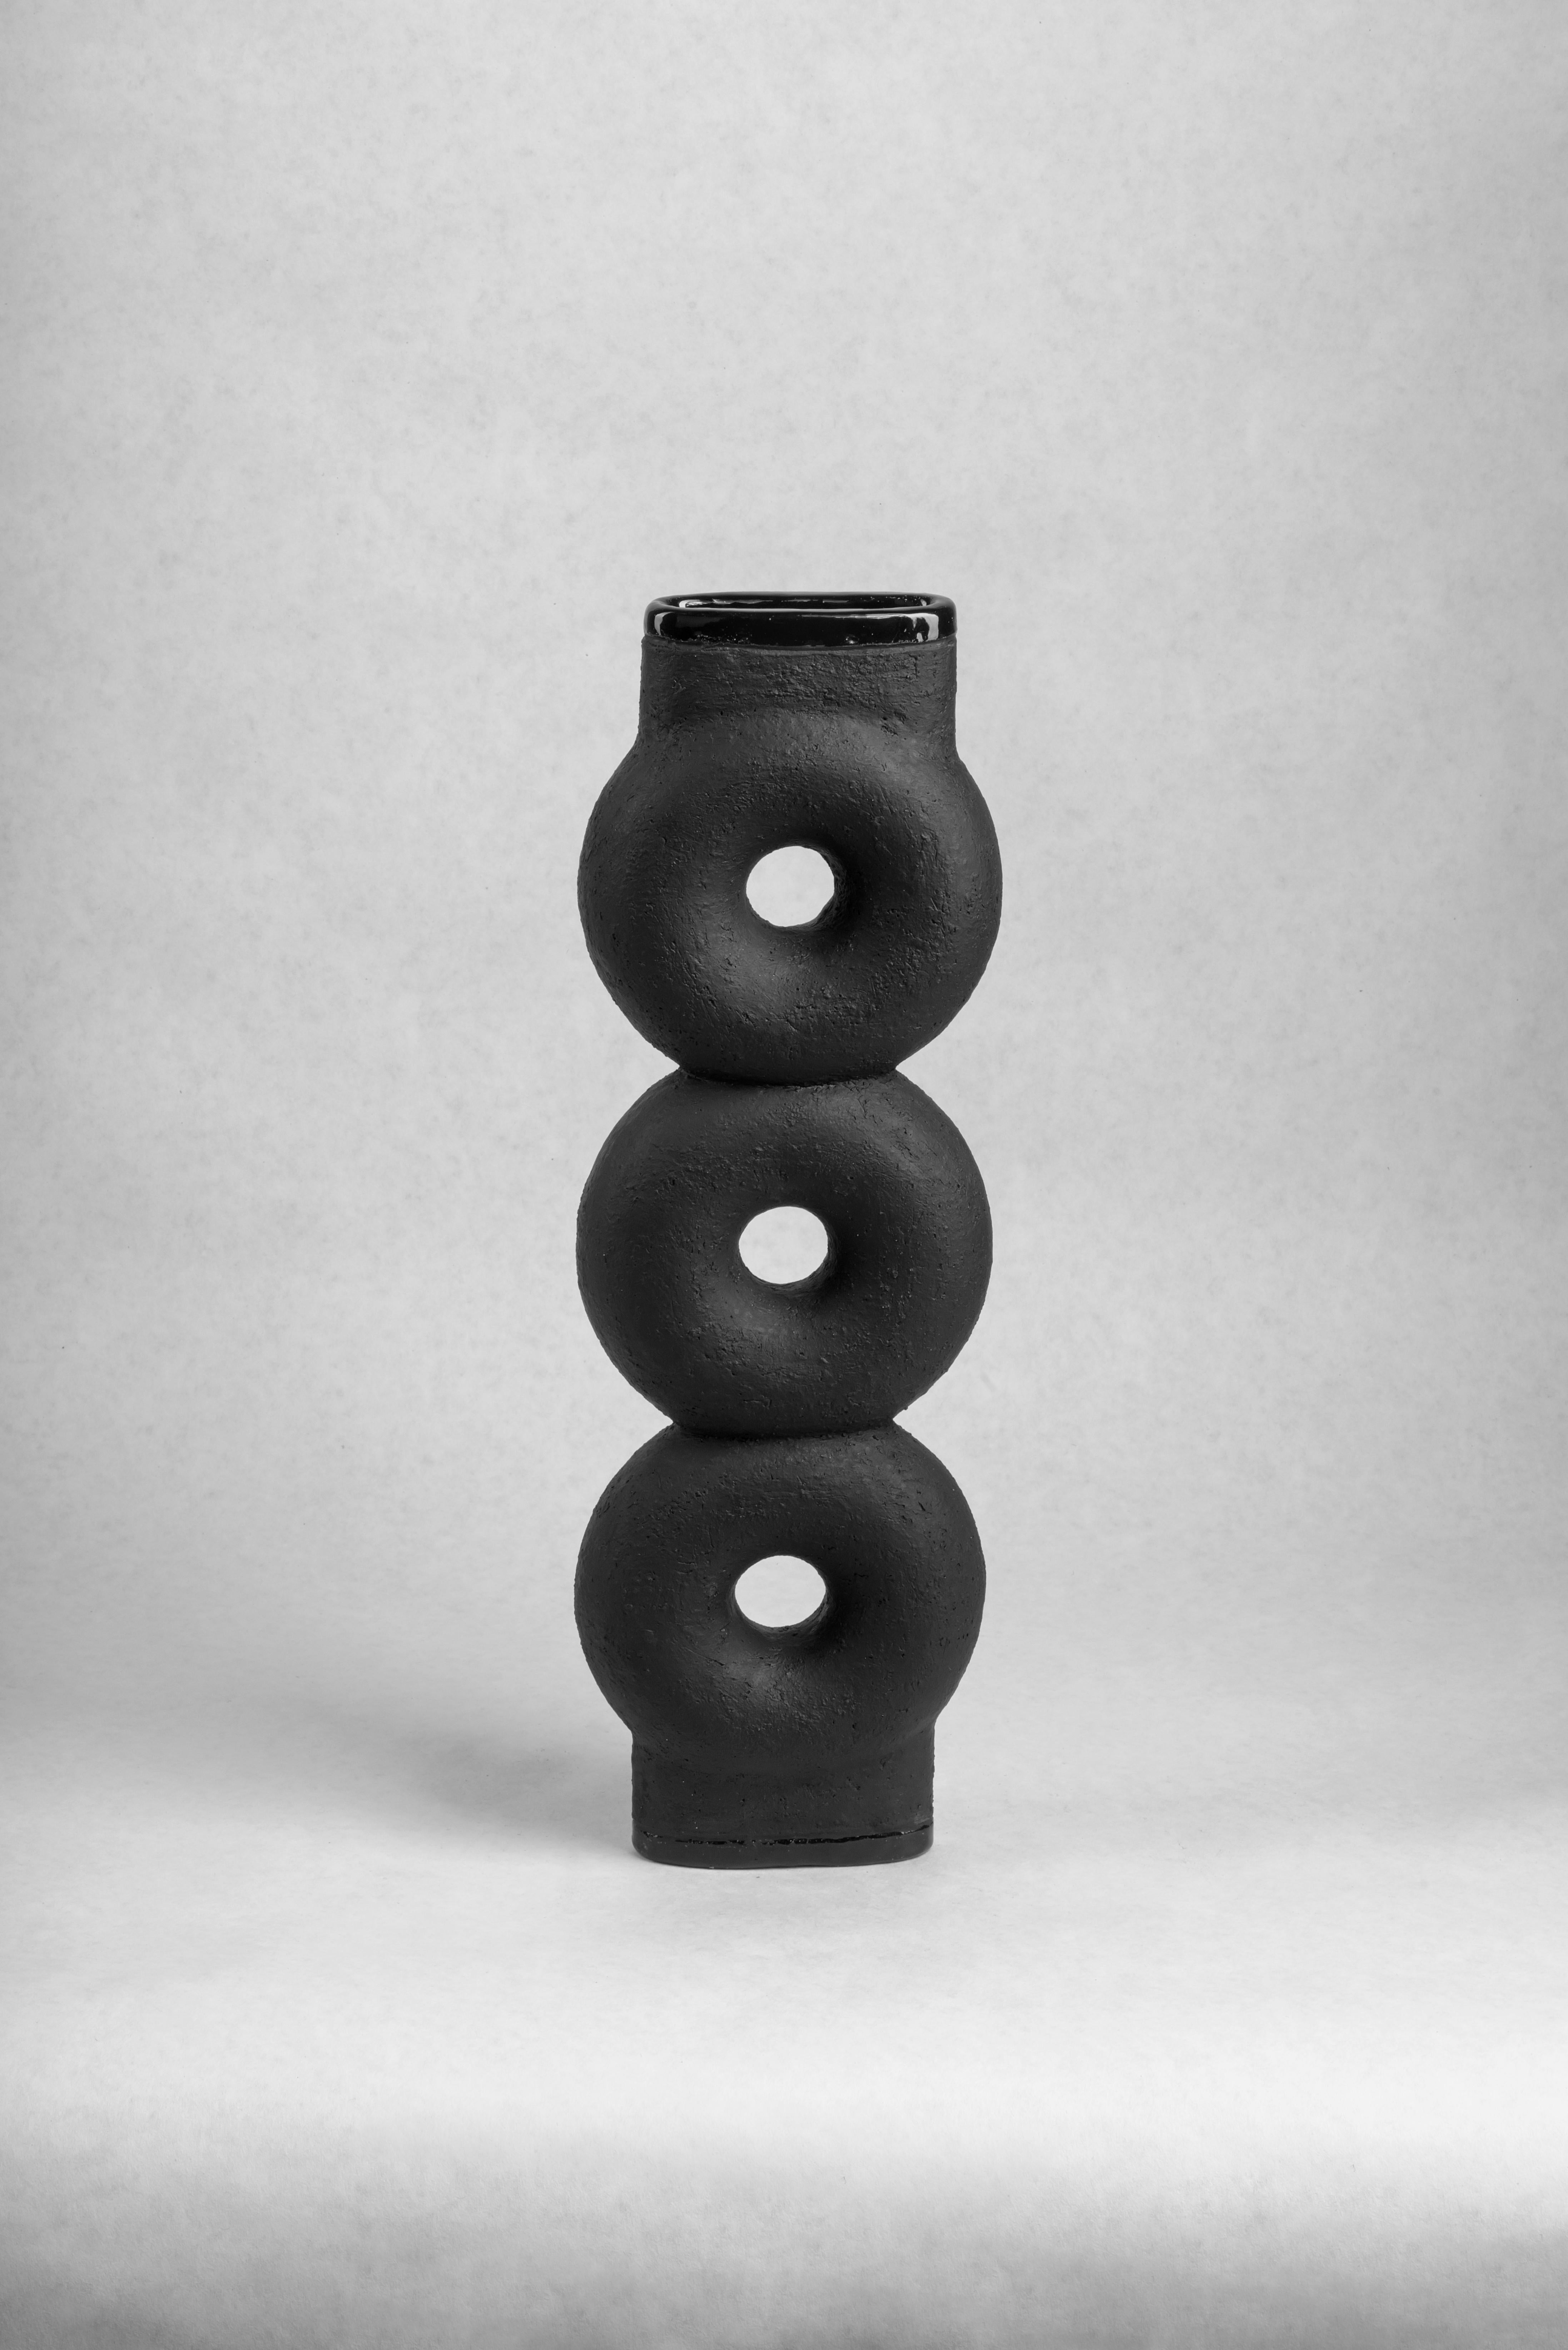 Pair of sculpted ceramic vase by FAINA
Design: Victoriya Yakusha
Material: clay / ceramics
Dimensions: 14 x 5 x H 43.5 cm


The vase is part of a series of 5 vases, the set of vases consists of:

1. Vase on three legs height 500 x width 200